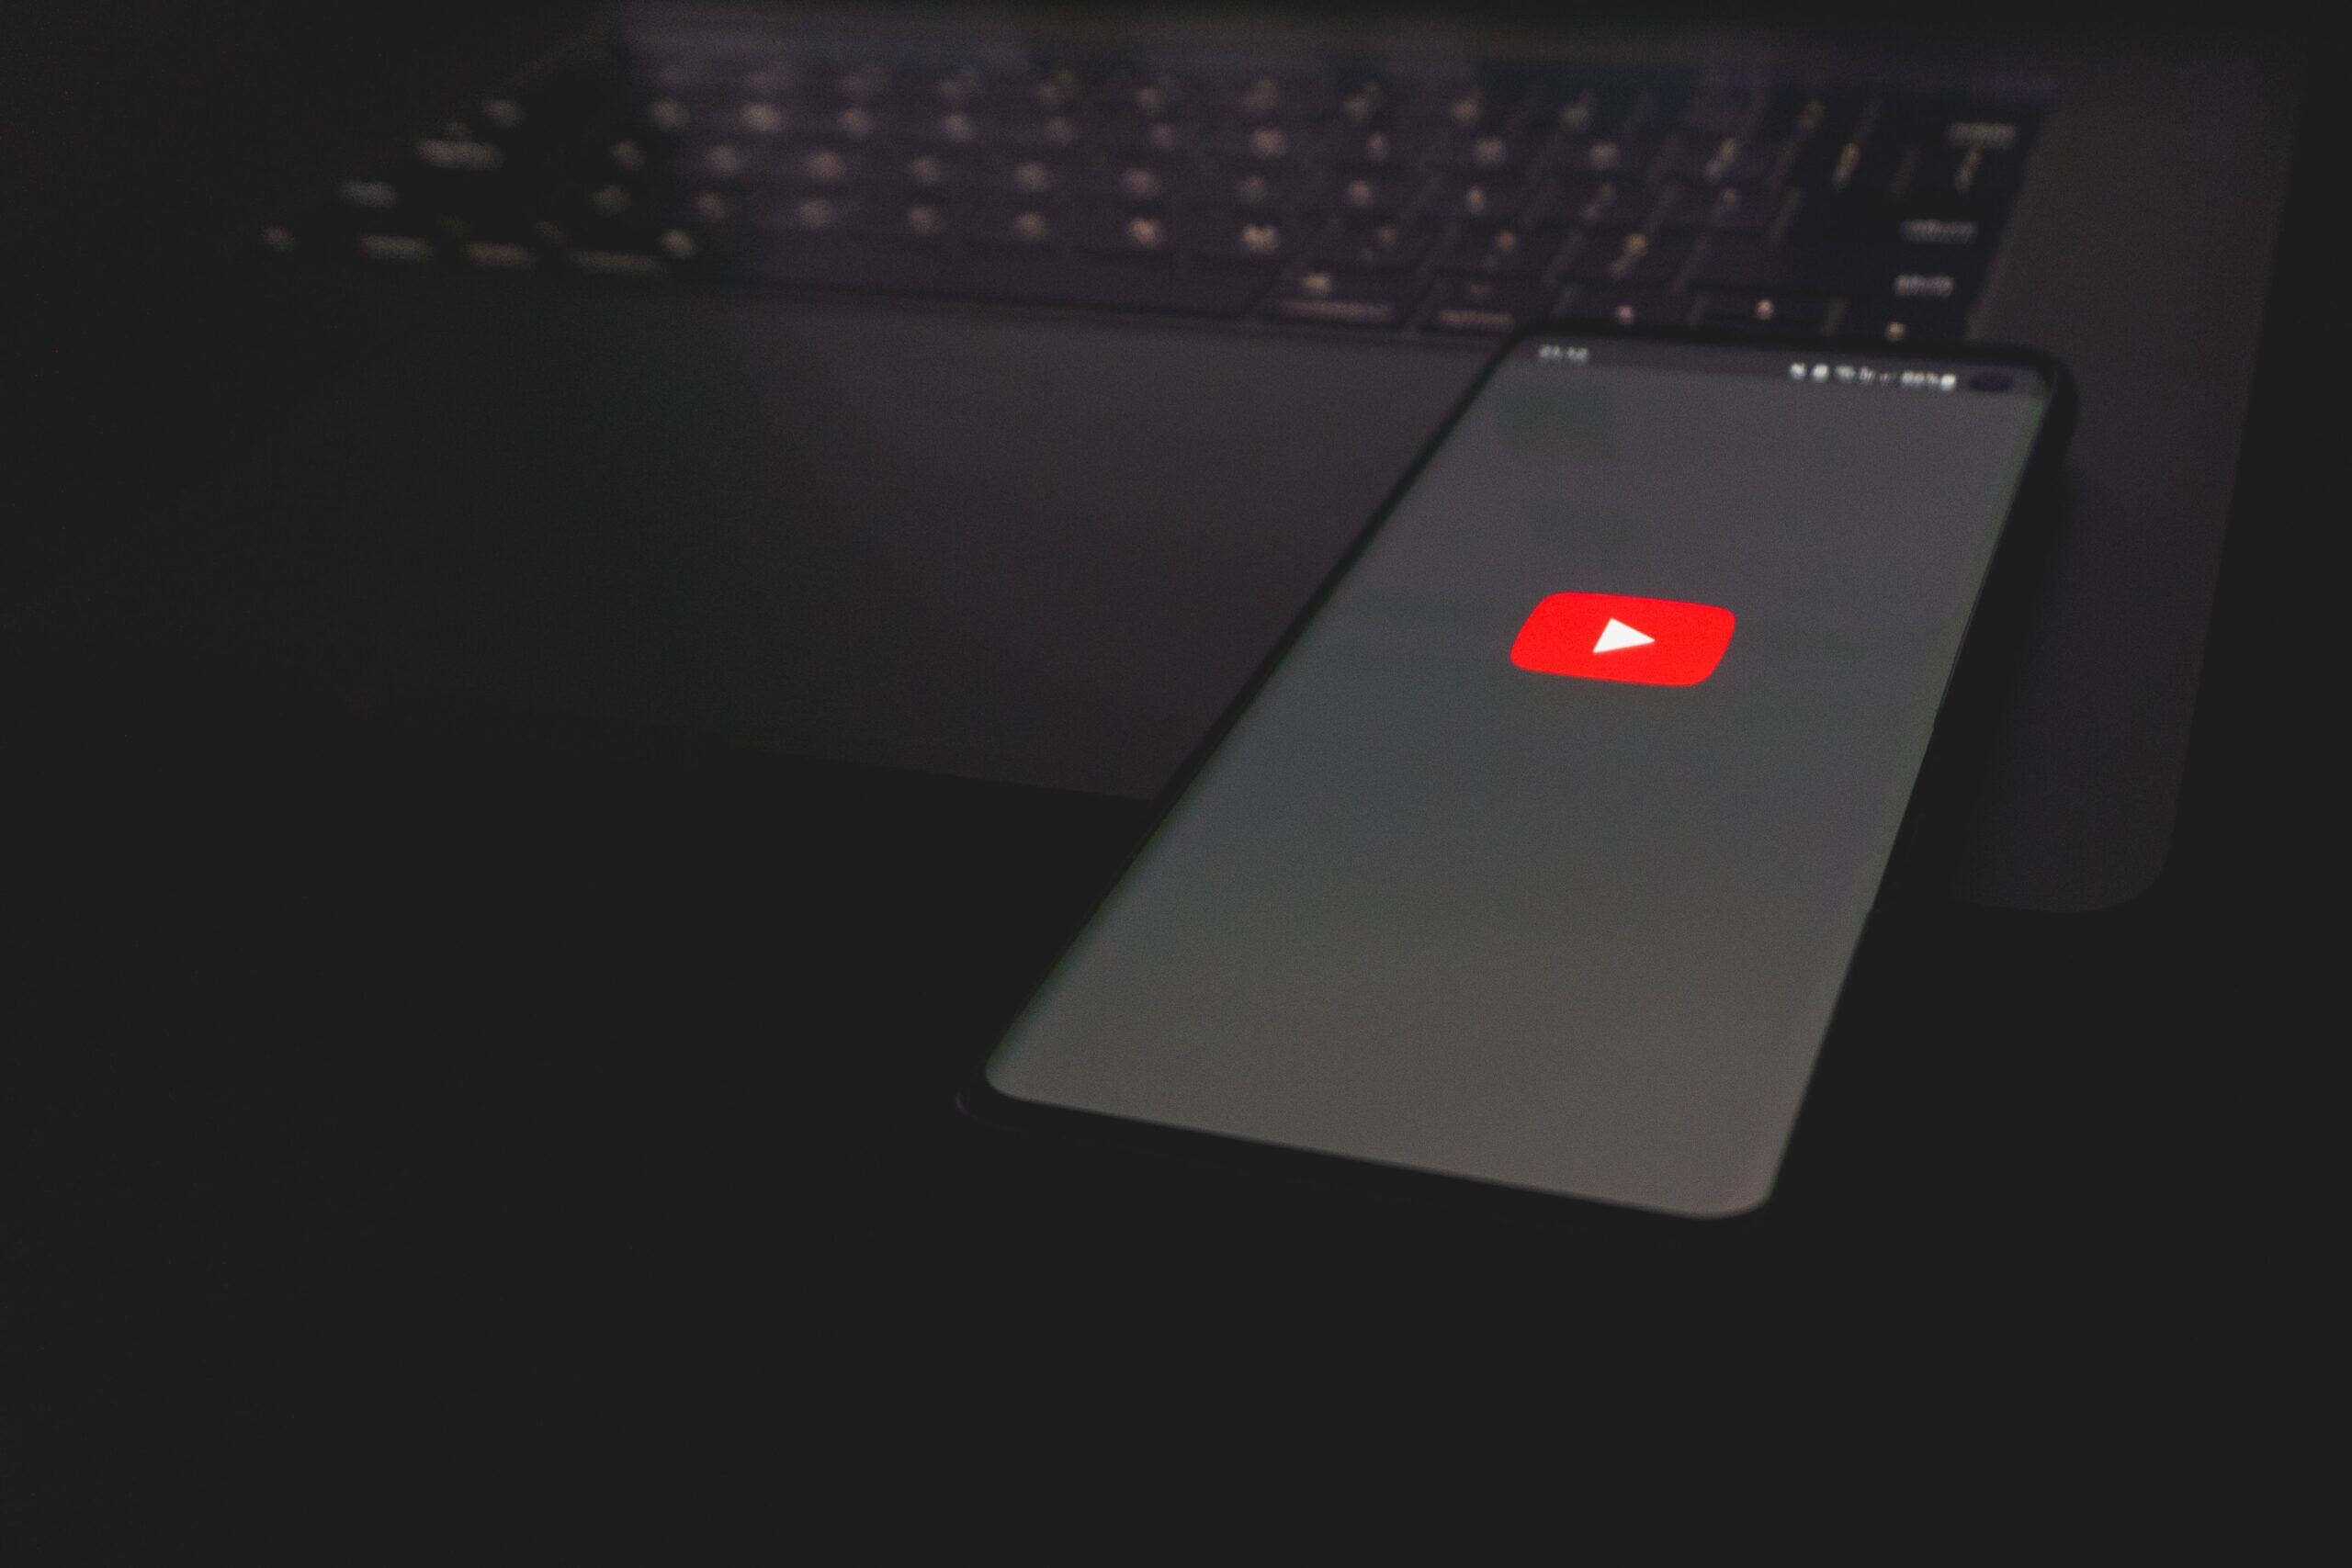 YouTube starts testing ‘1080p Premium’ streaming bitrate on mobile app